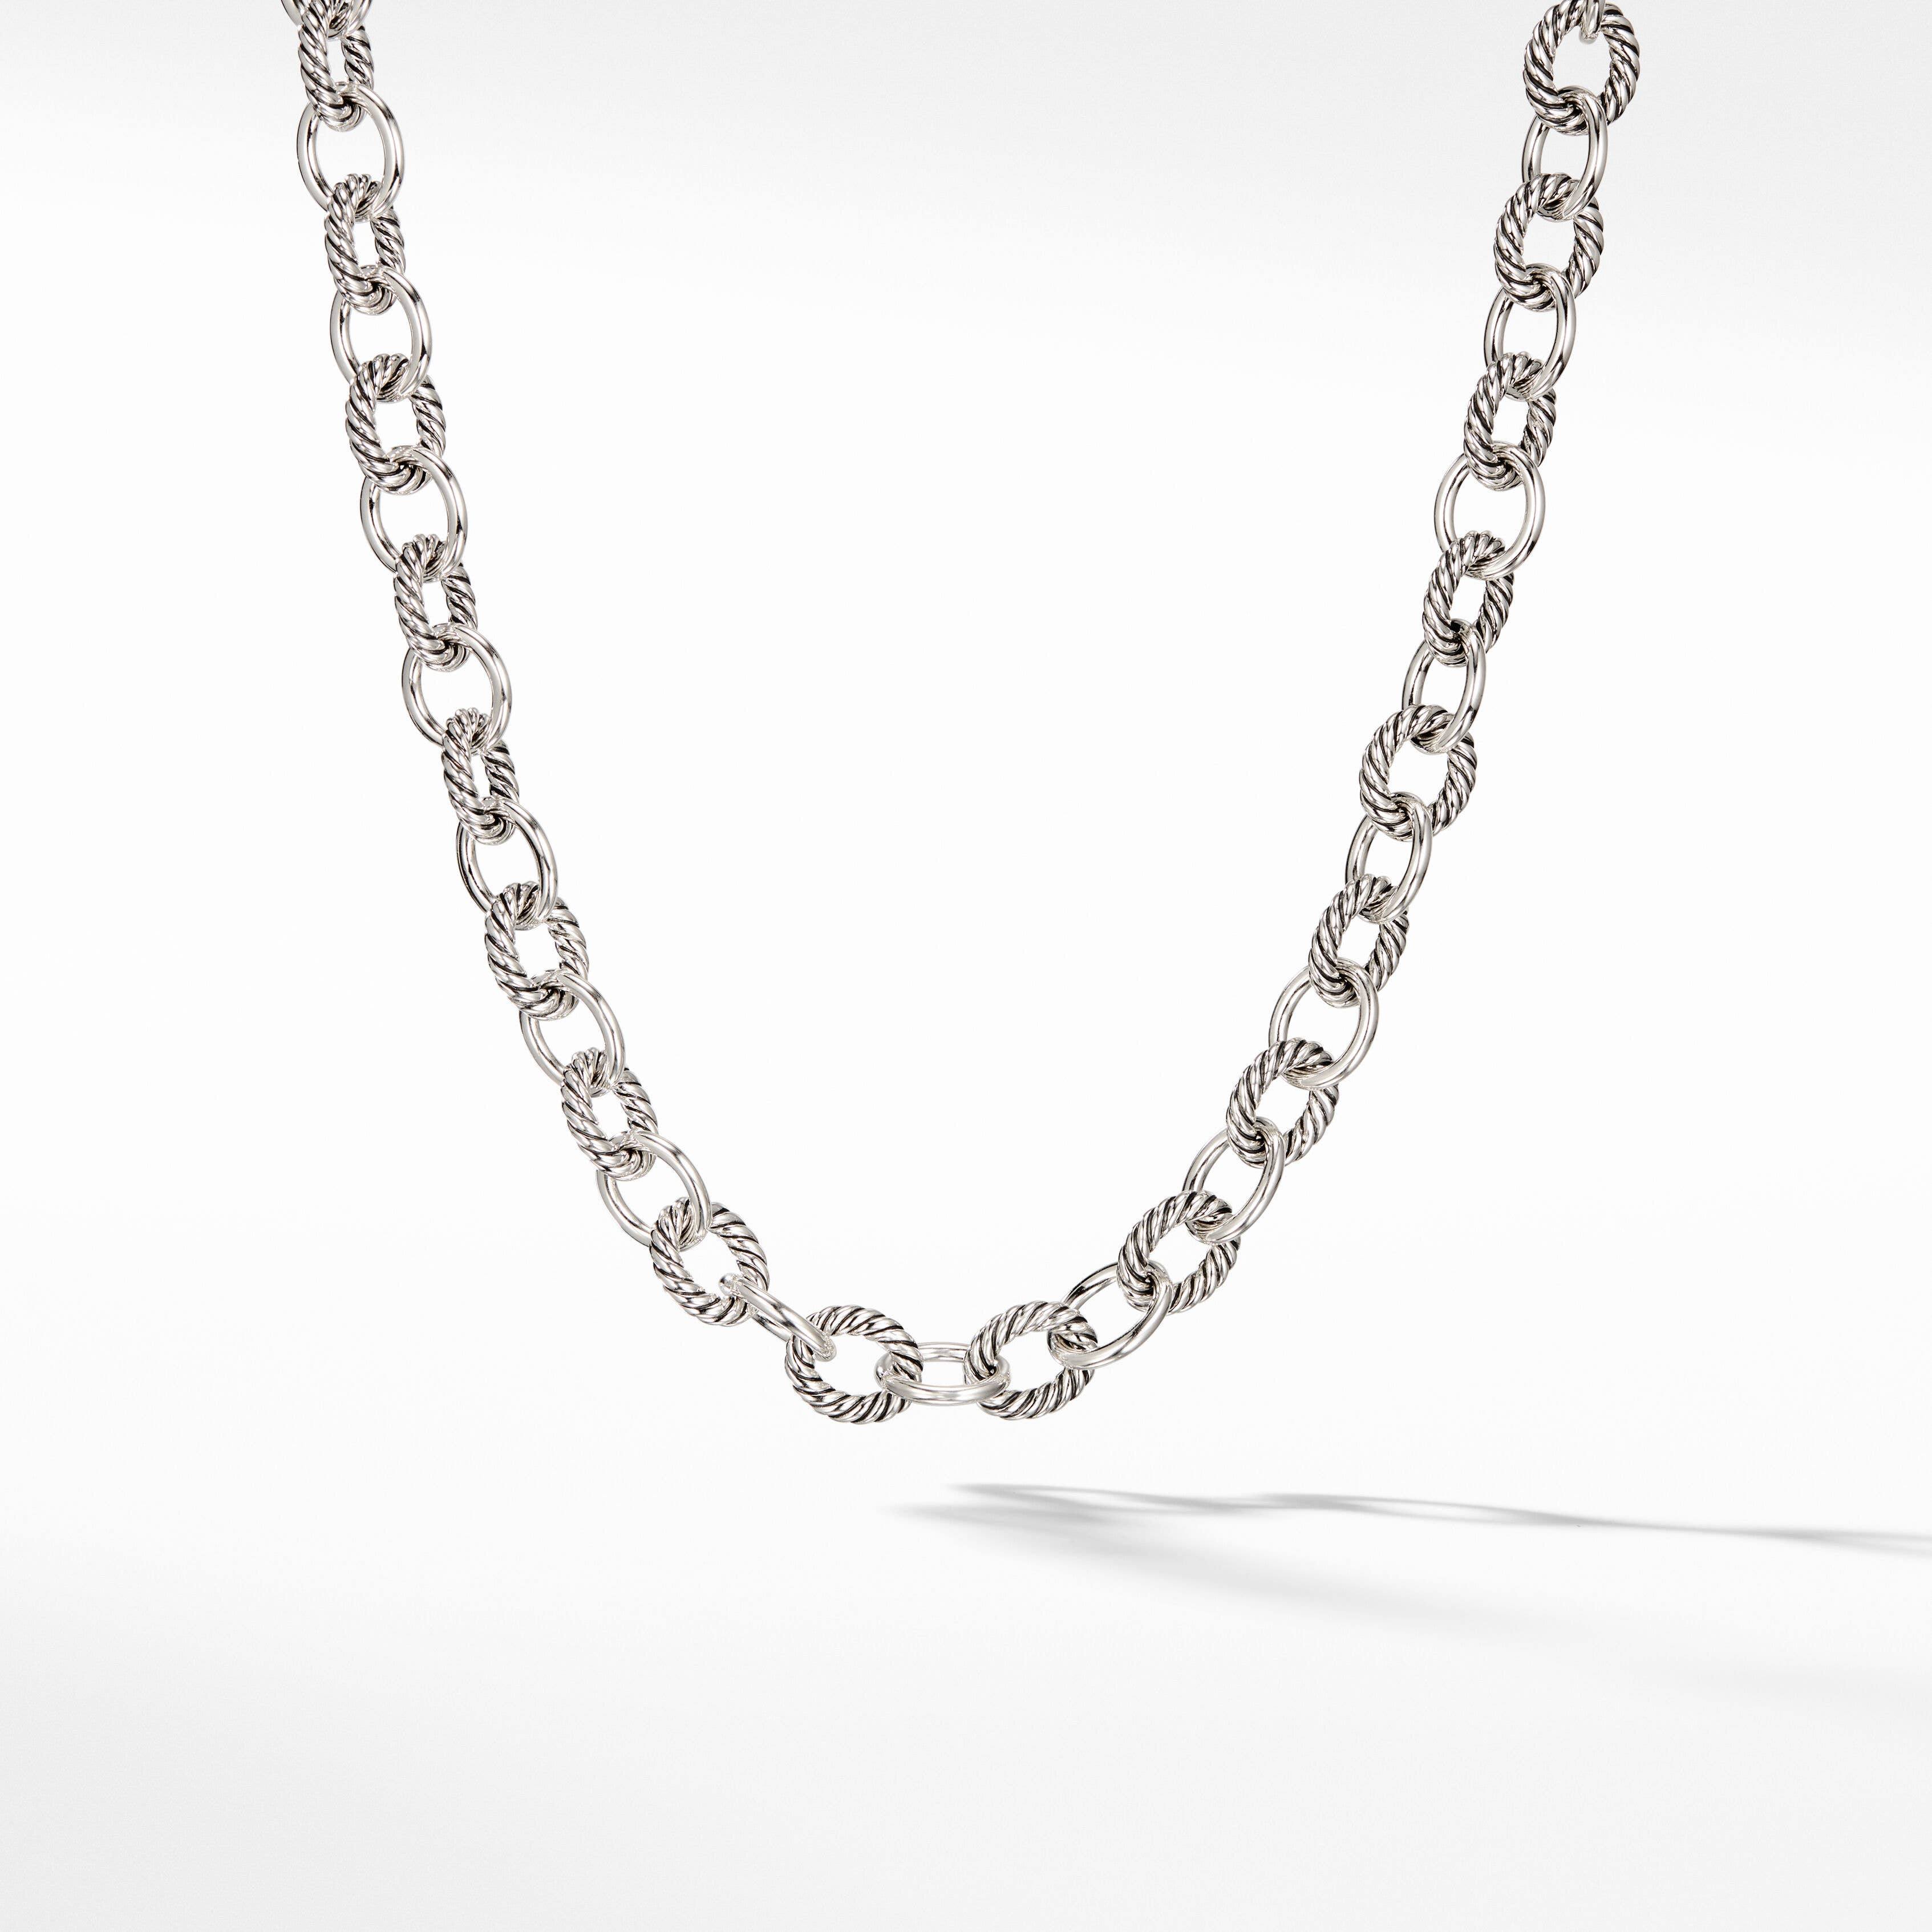 Oval Link Chain Necklace in Sterling Silver